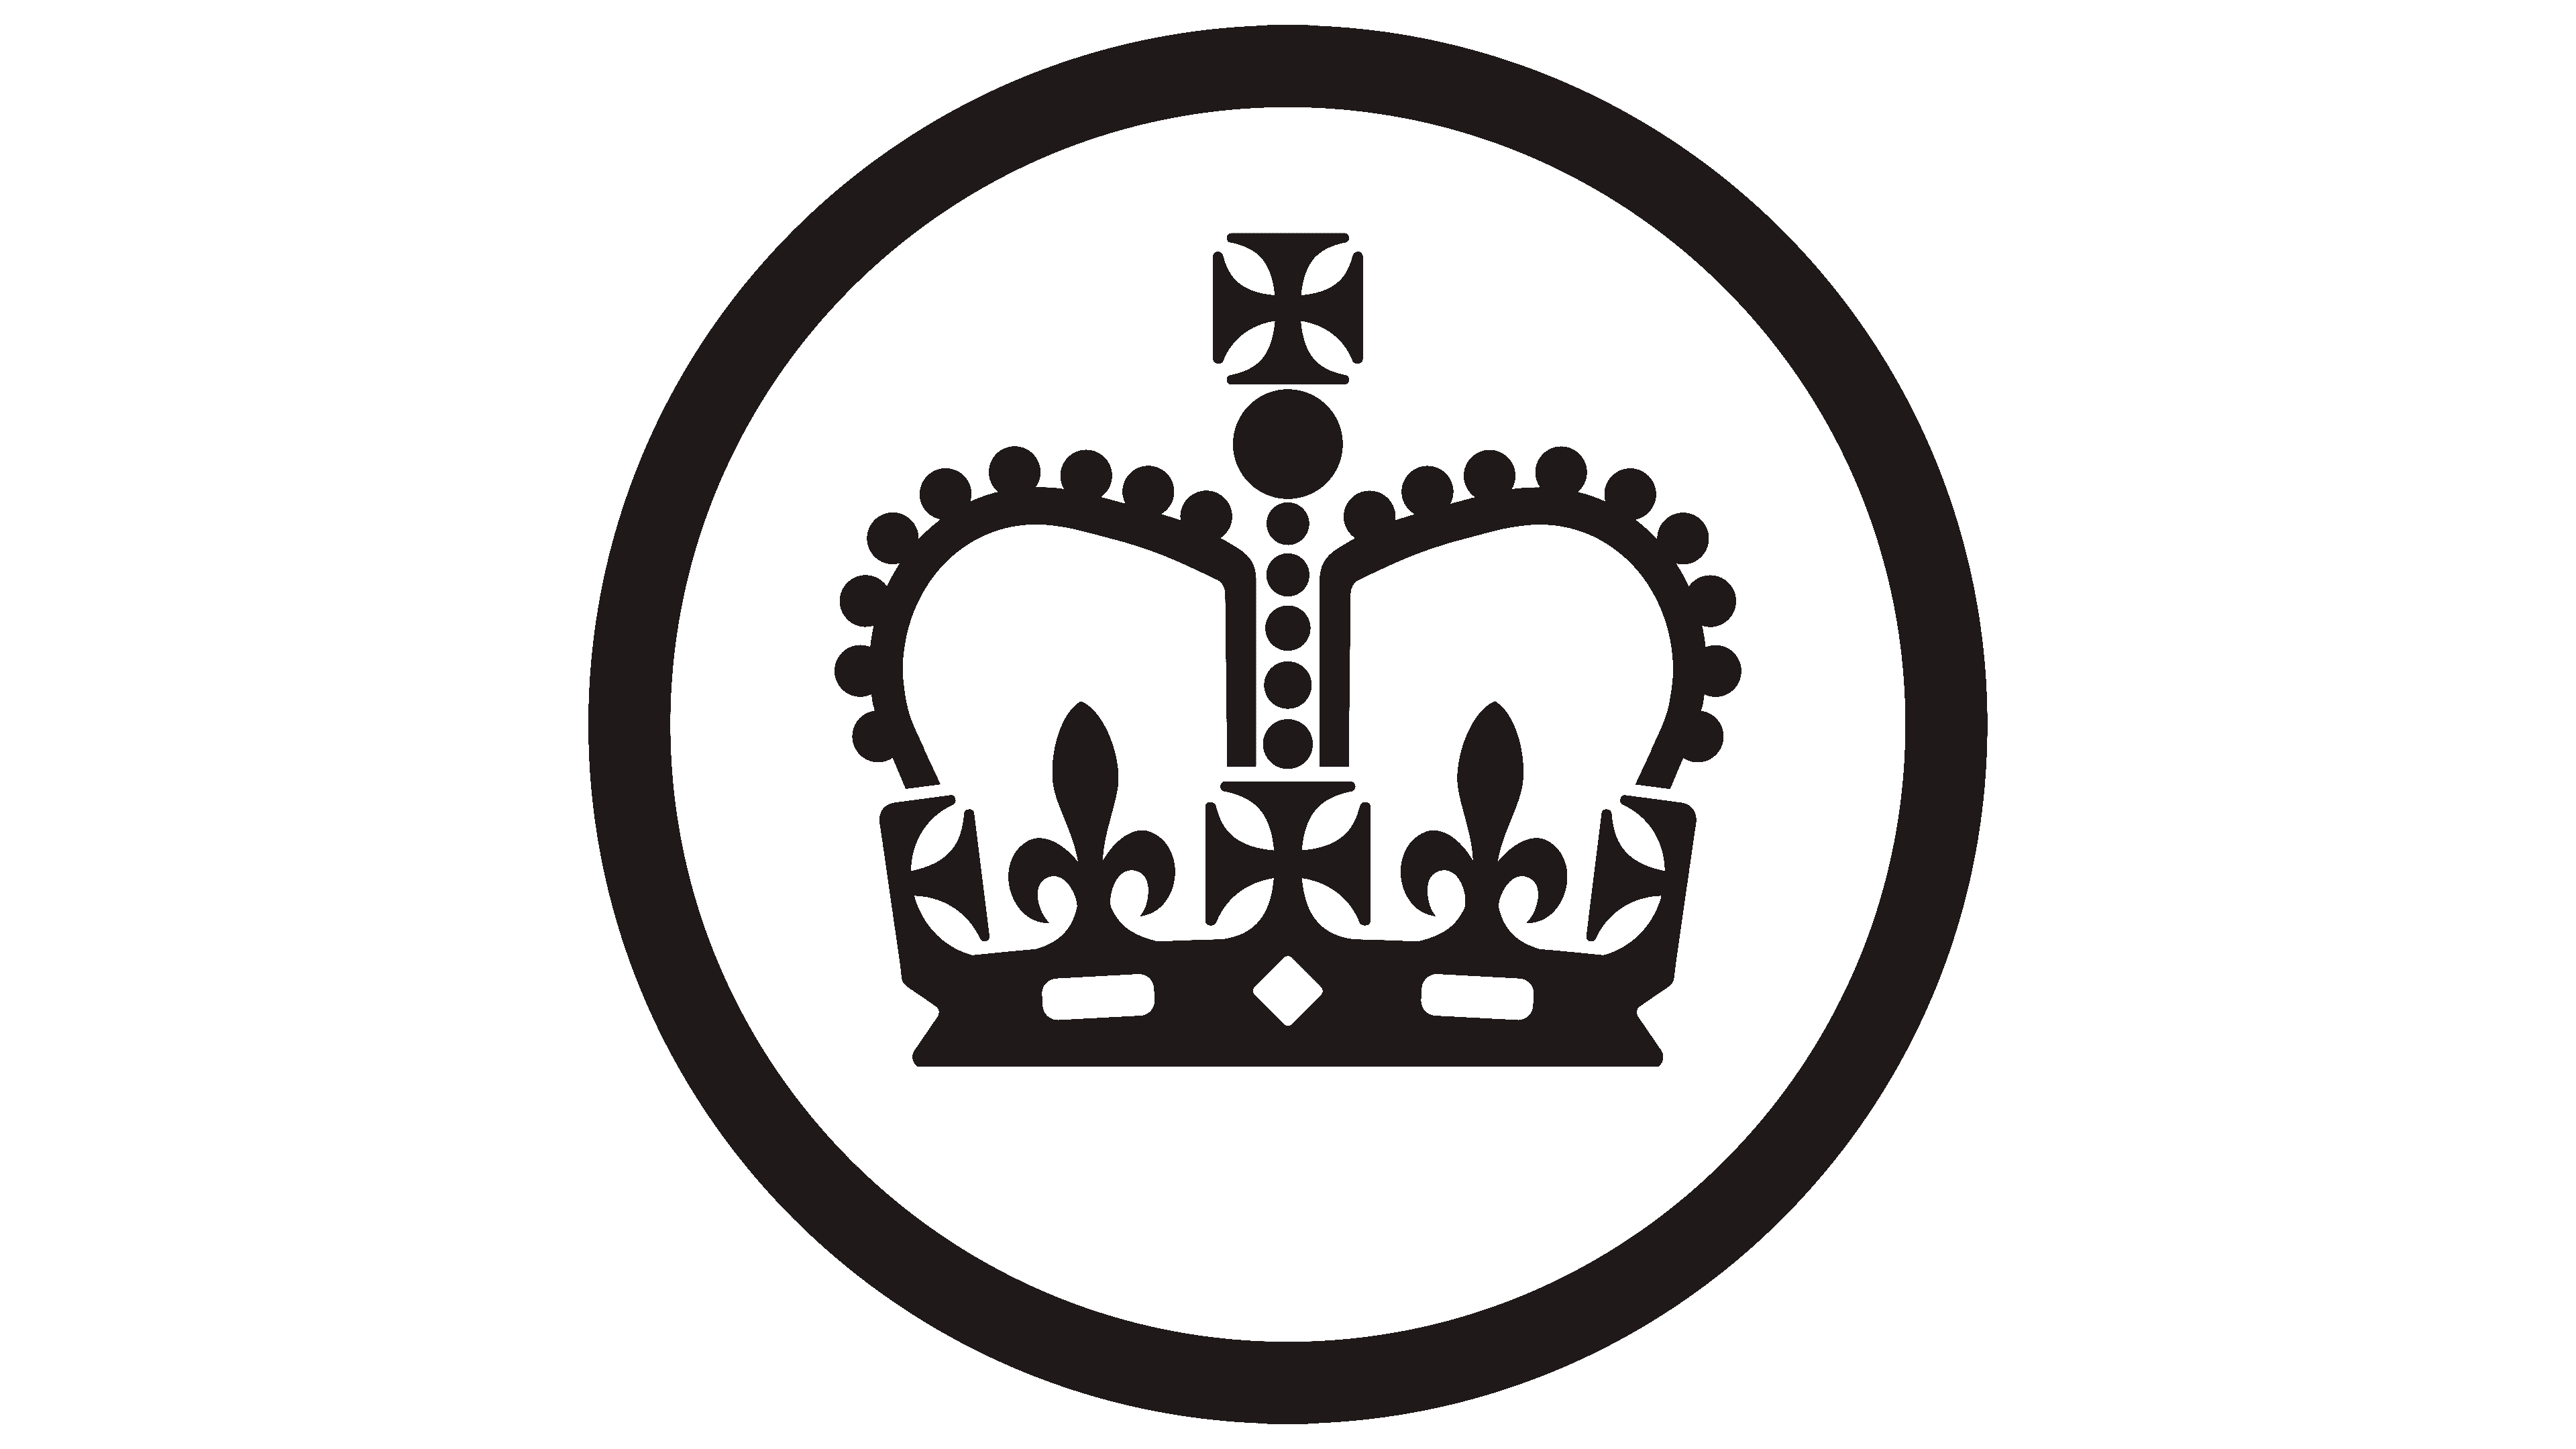 HMRC Logo, symbol, meaning, history, PNG, brand